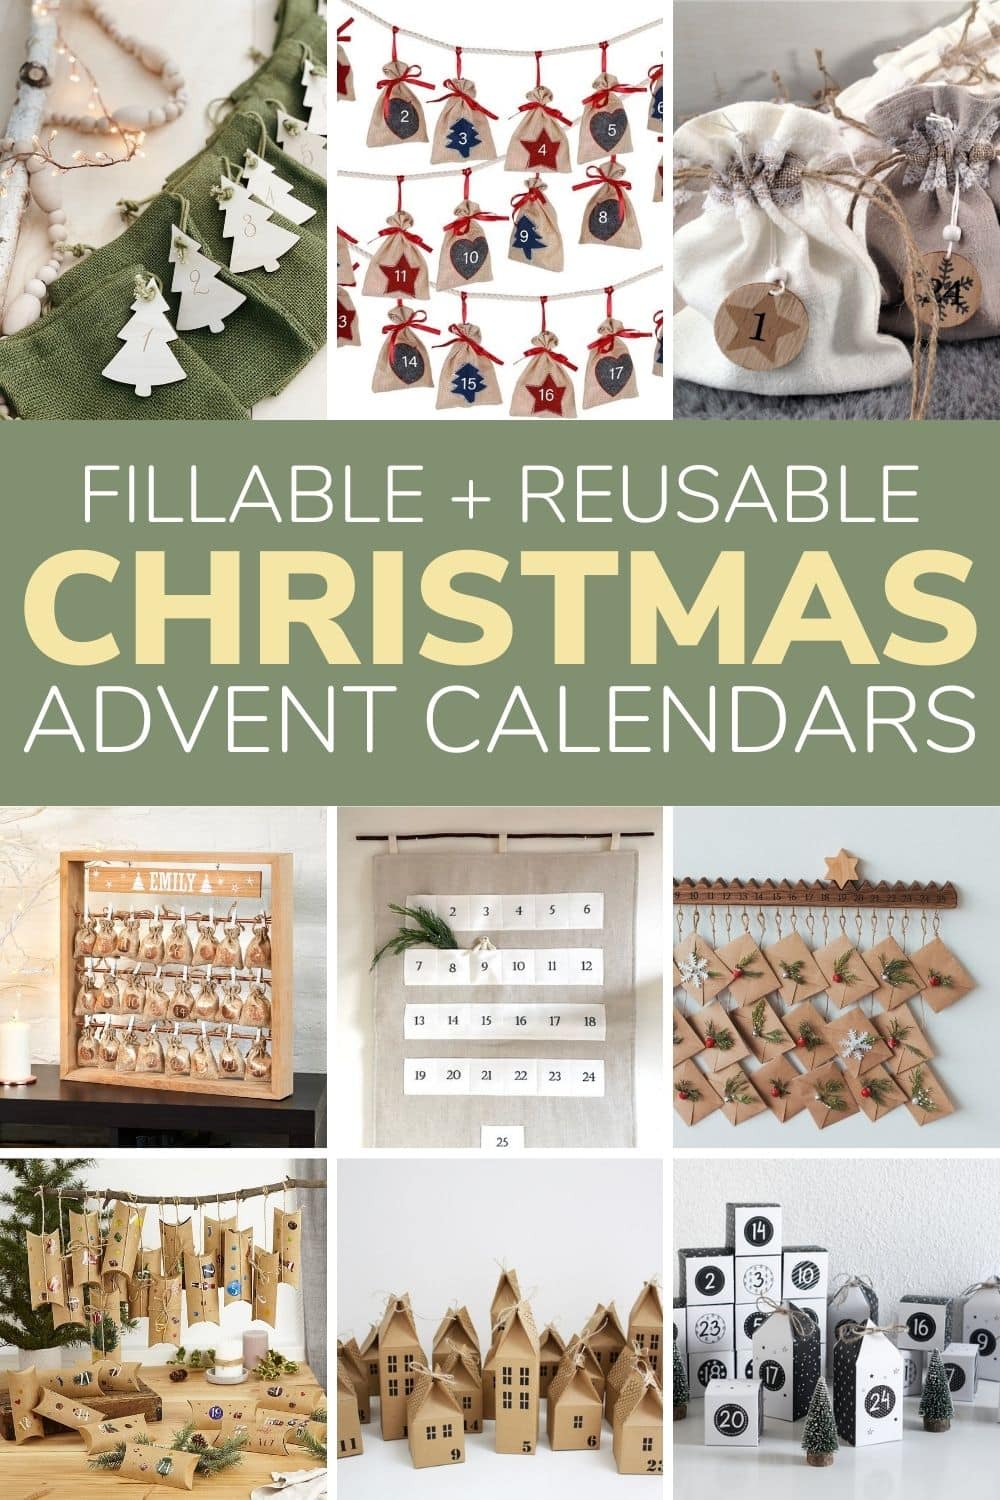 Photo collage graphic of advent calendars with text overlay "Fillable + Reusable Christmas Advent Calendars".